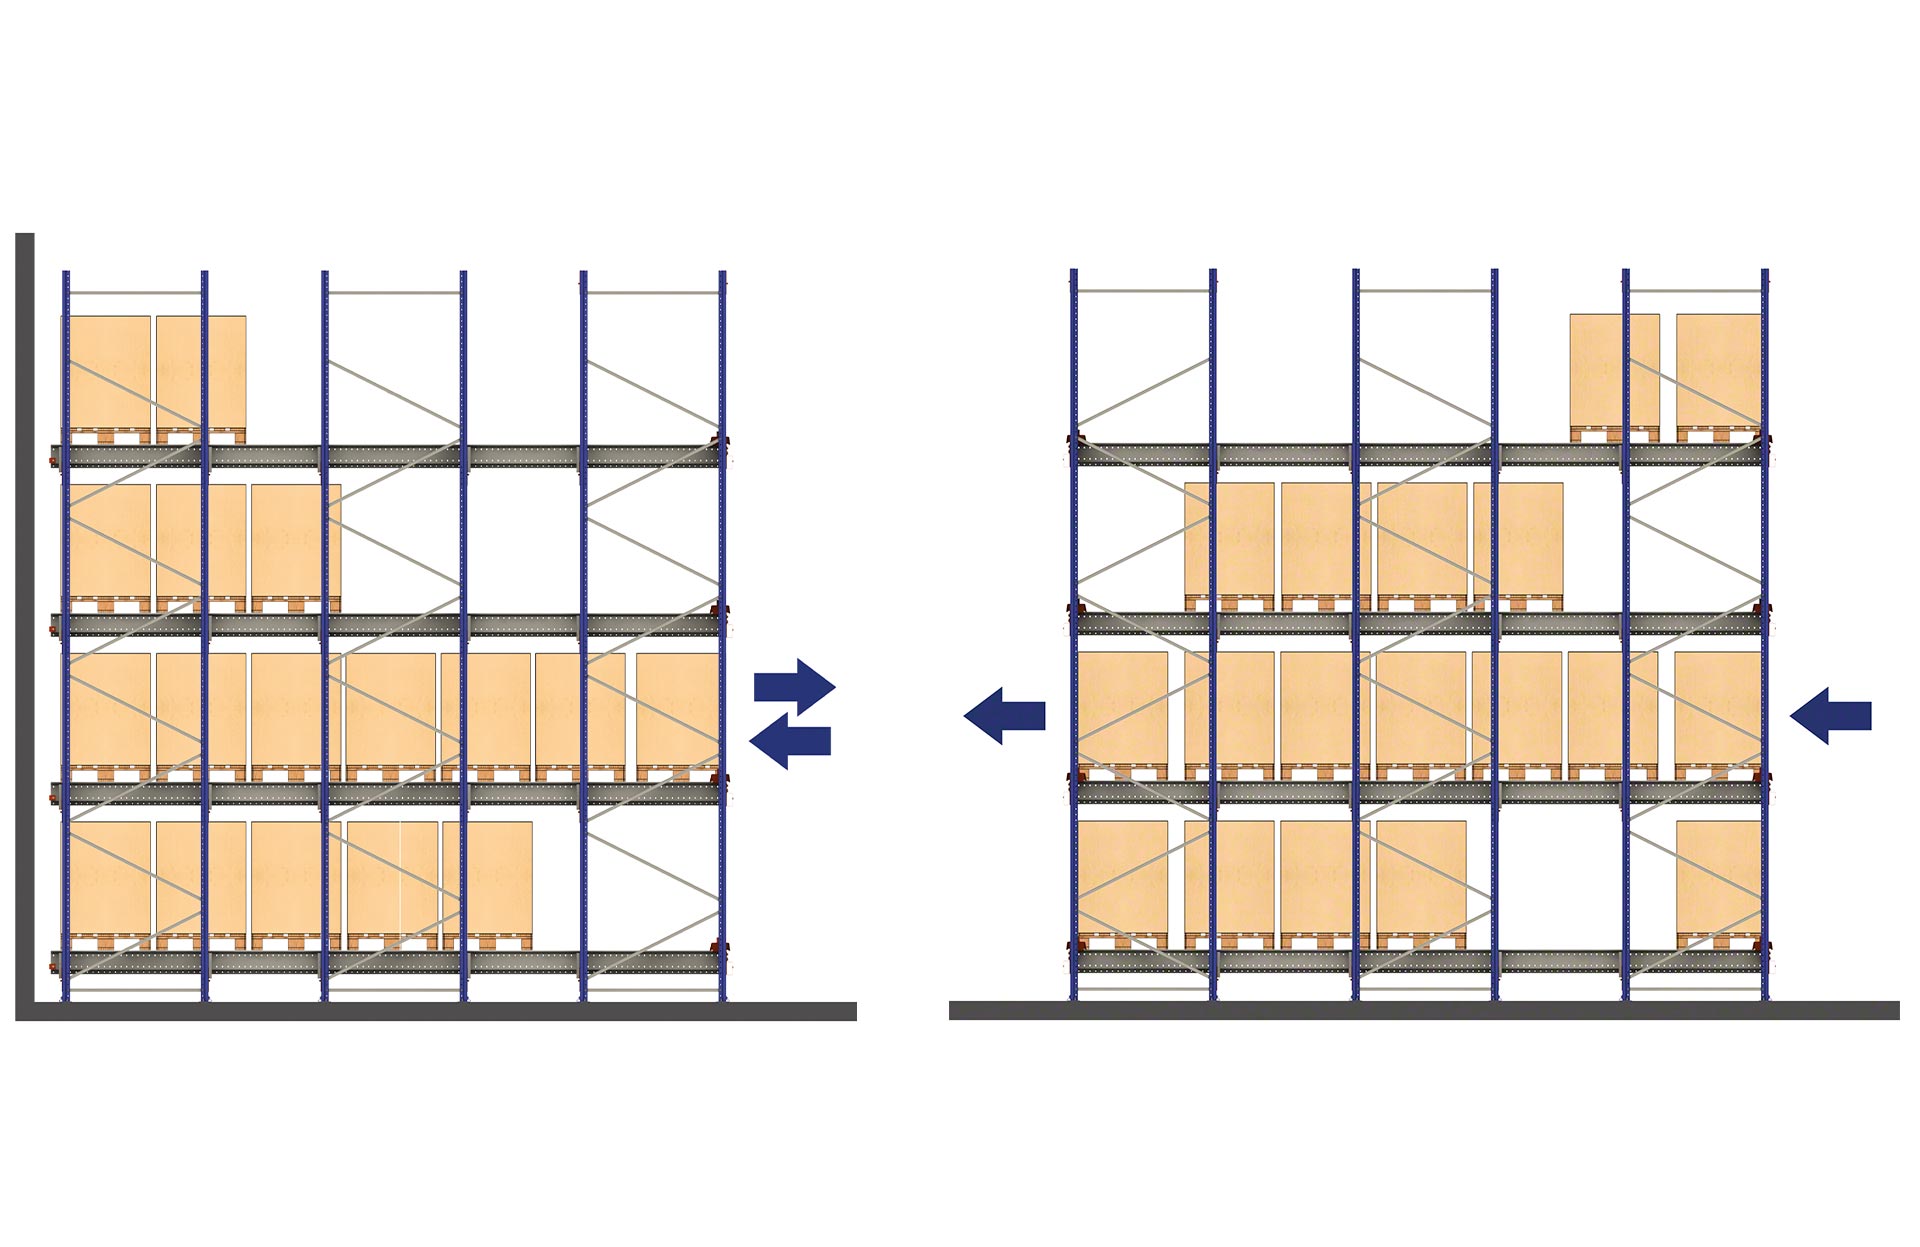 With the LIFO (last in, first out) configuration, pallets enter and leave on the same side; with FIFO (first in, first out), loading and unloading are carried out from different aisles